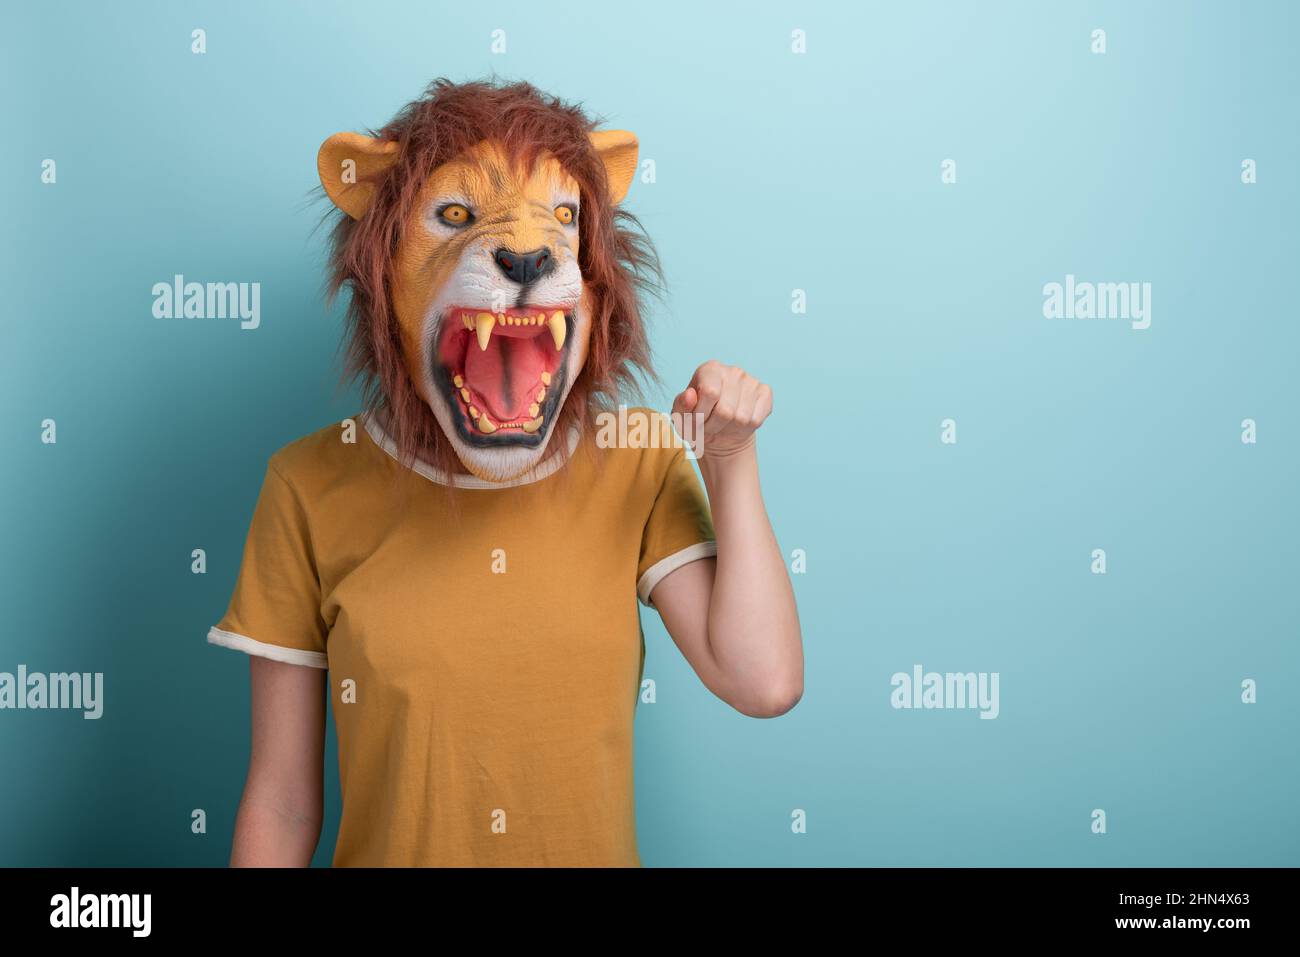 Young woman in lion mask hold raised hand for fist bump, isolated on blue background with copy-space. Stock Photo